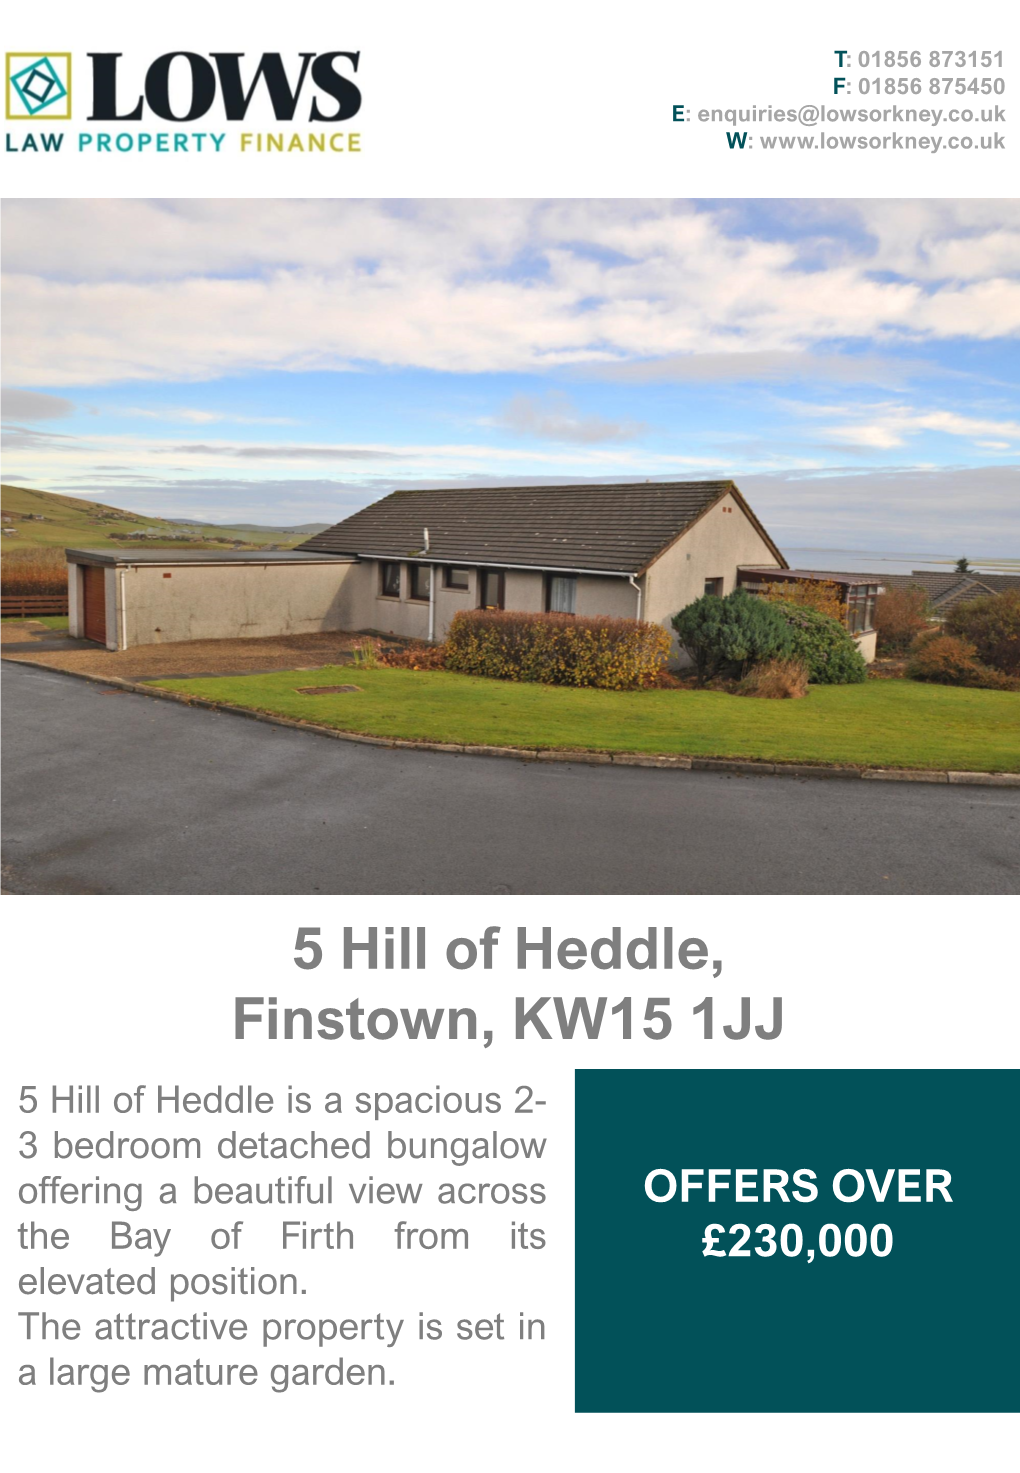 5 Hill of Heddle, Finstown